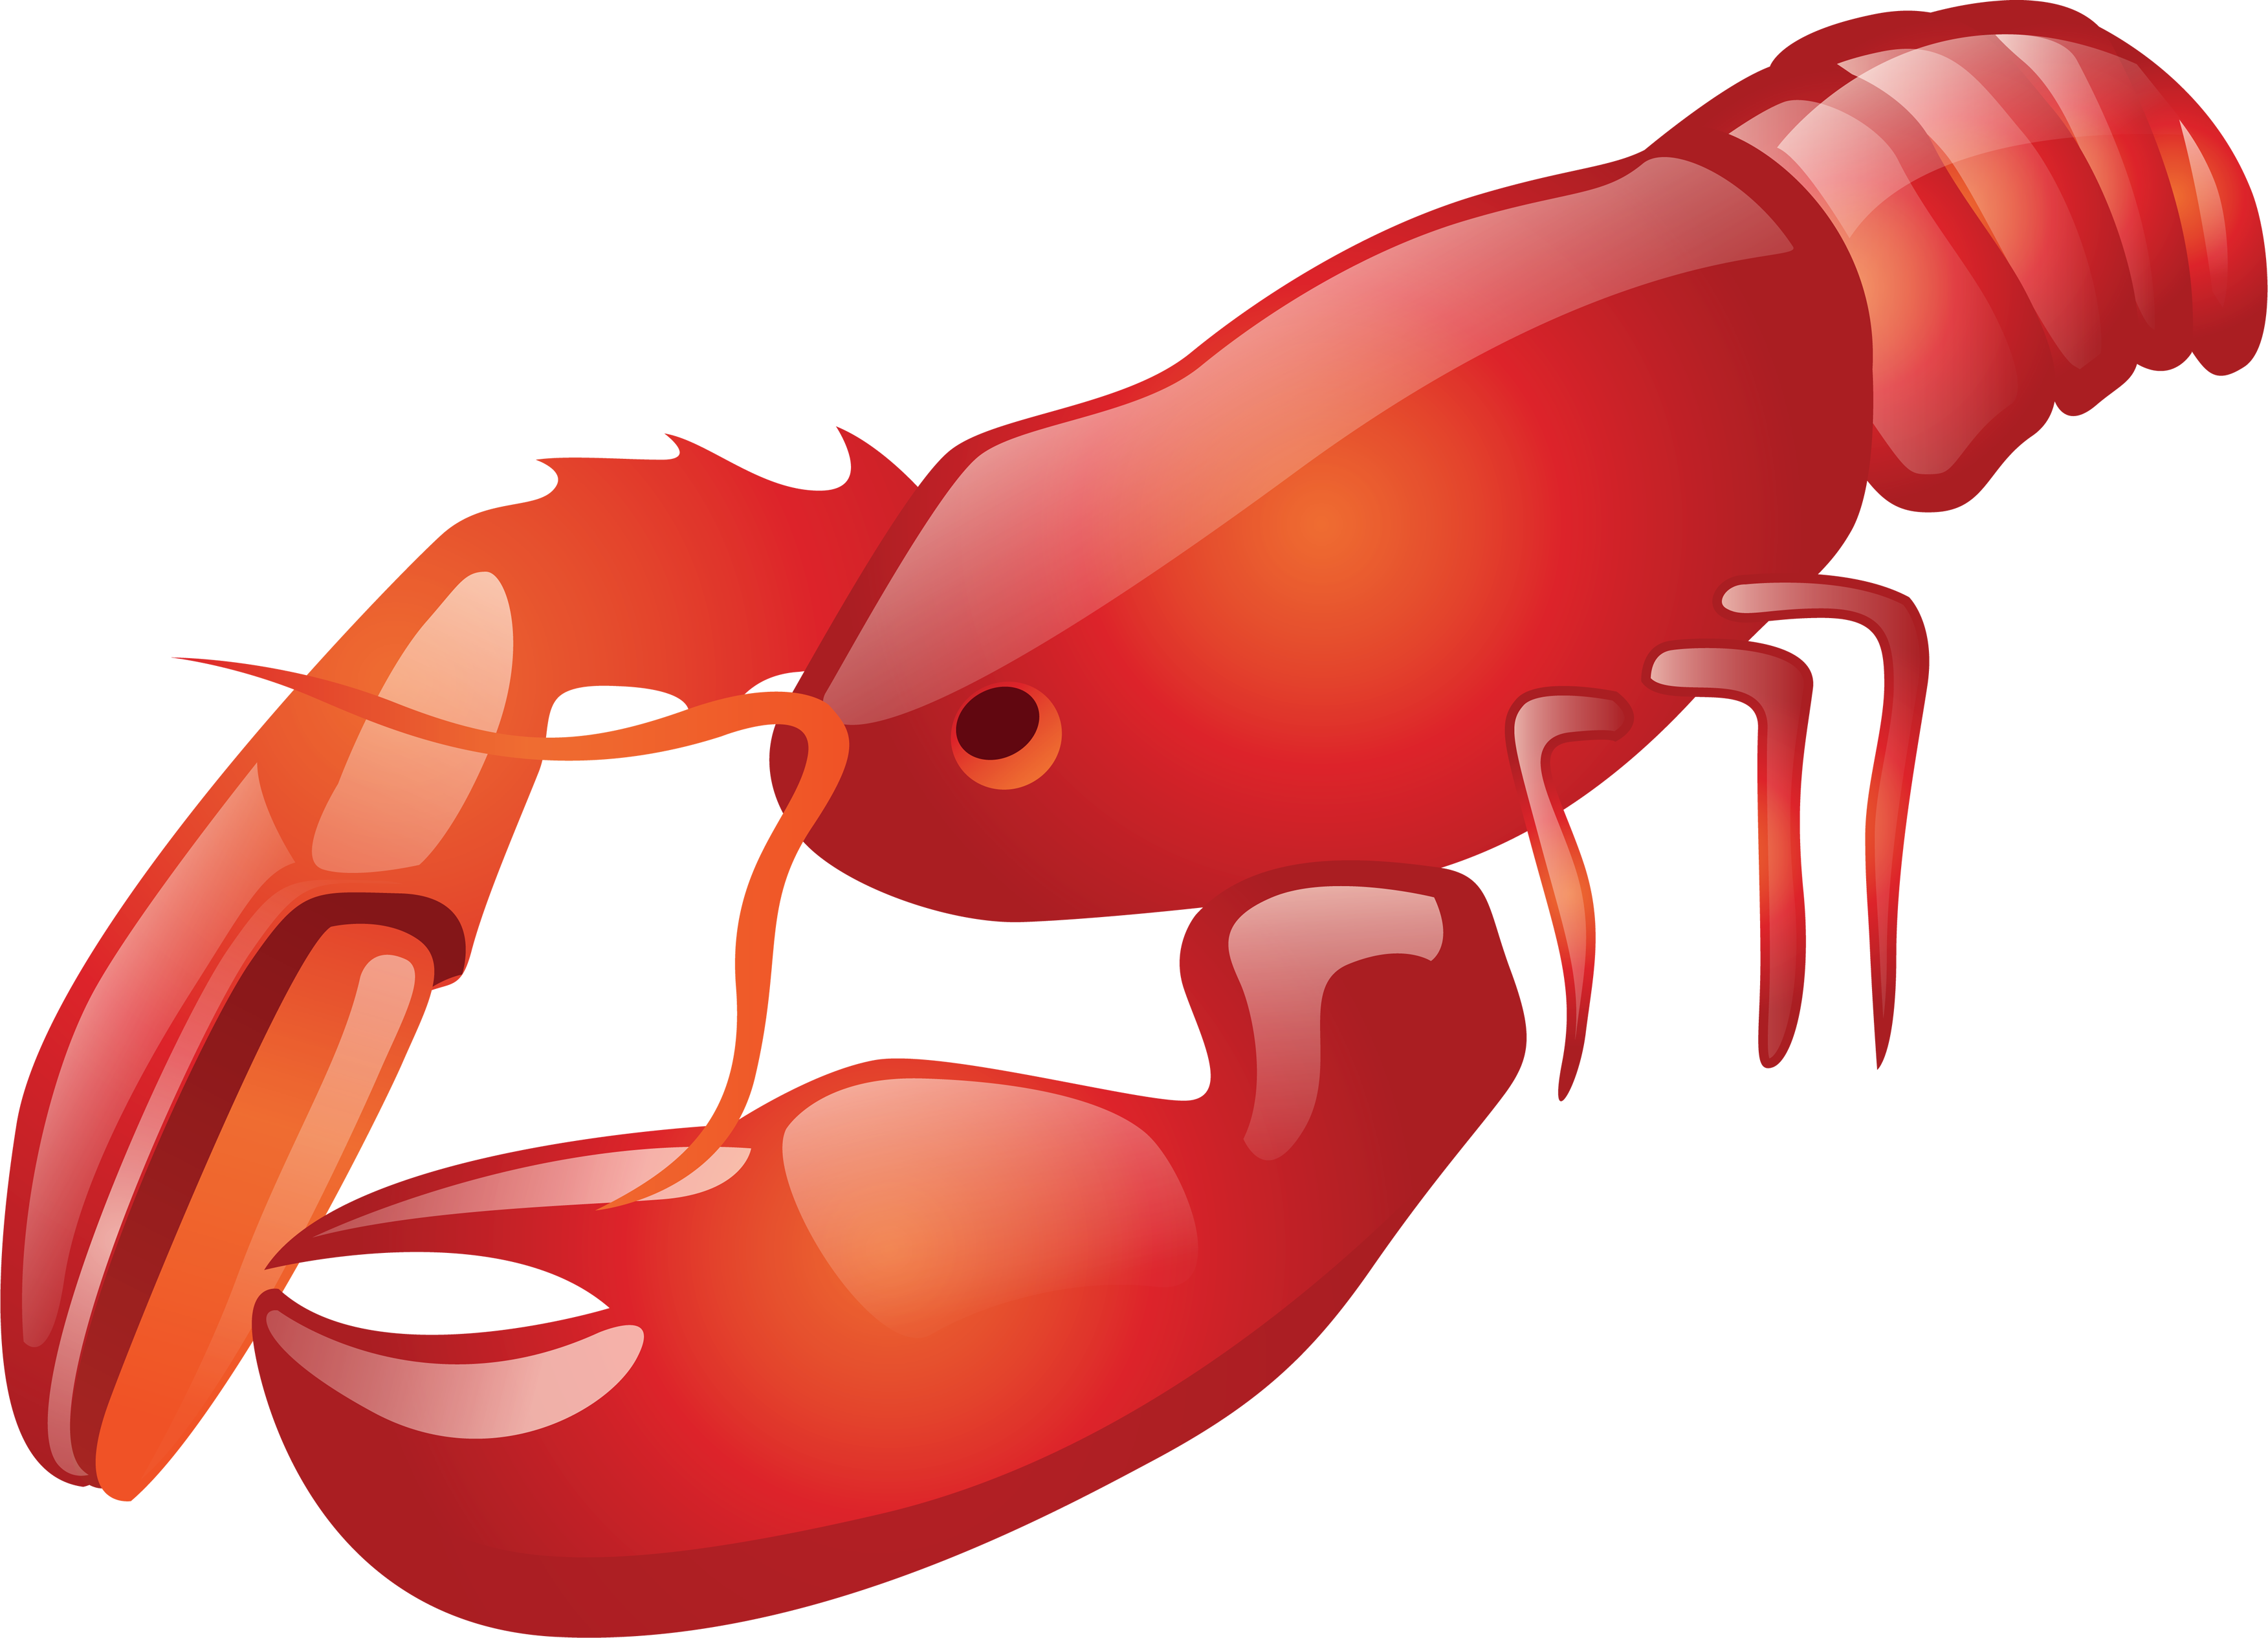 Lobster clip art images free clipart 2 - Cliparting.com